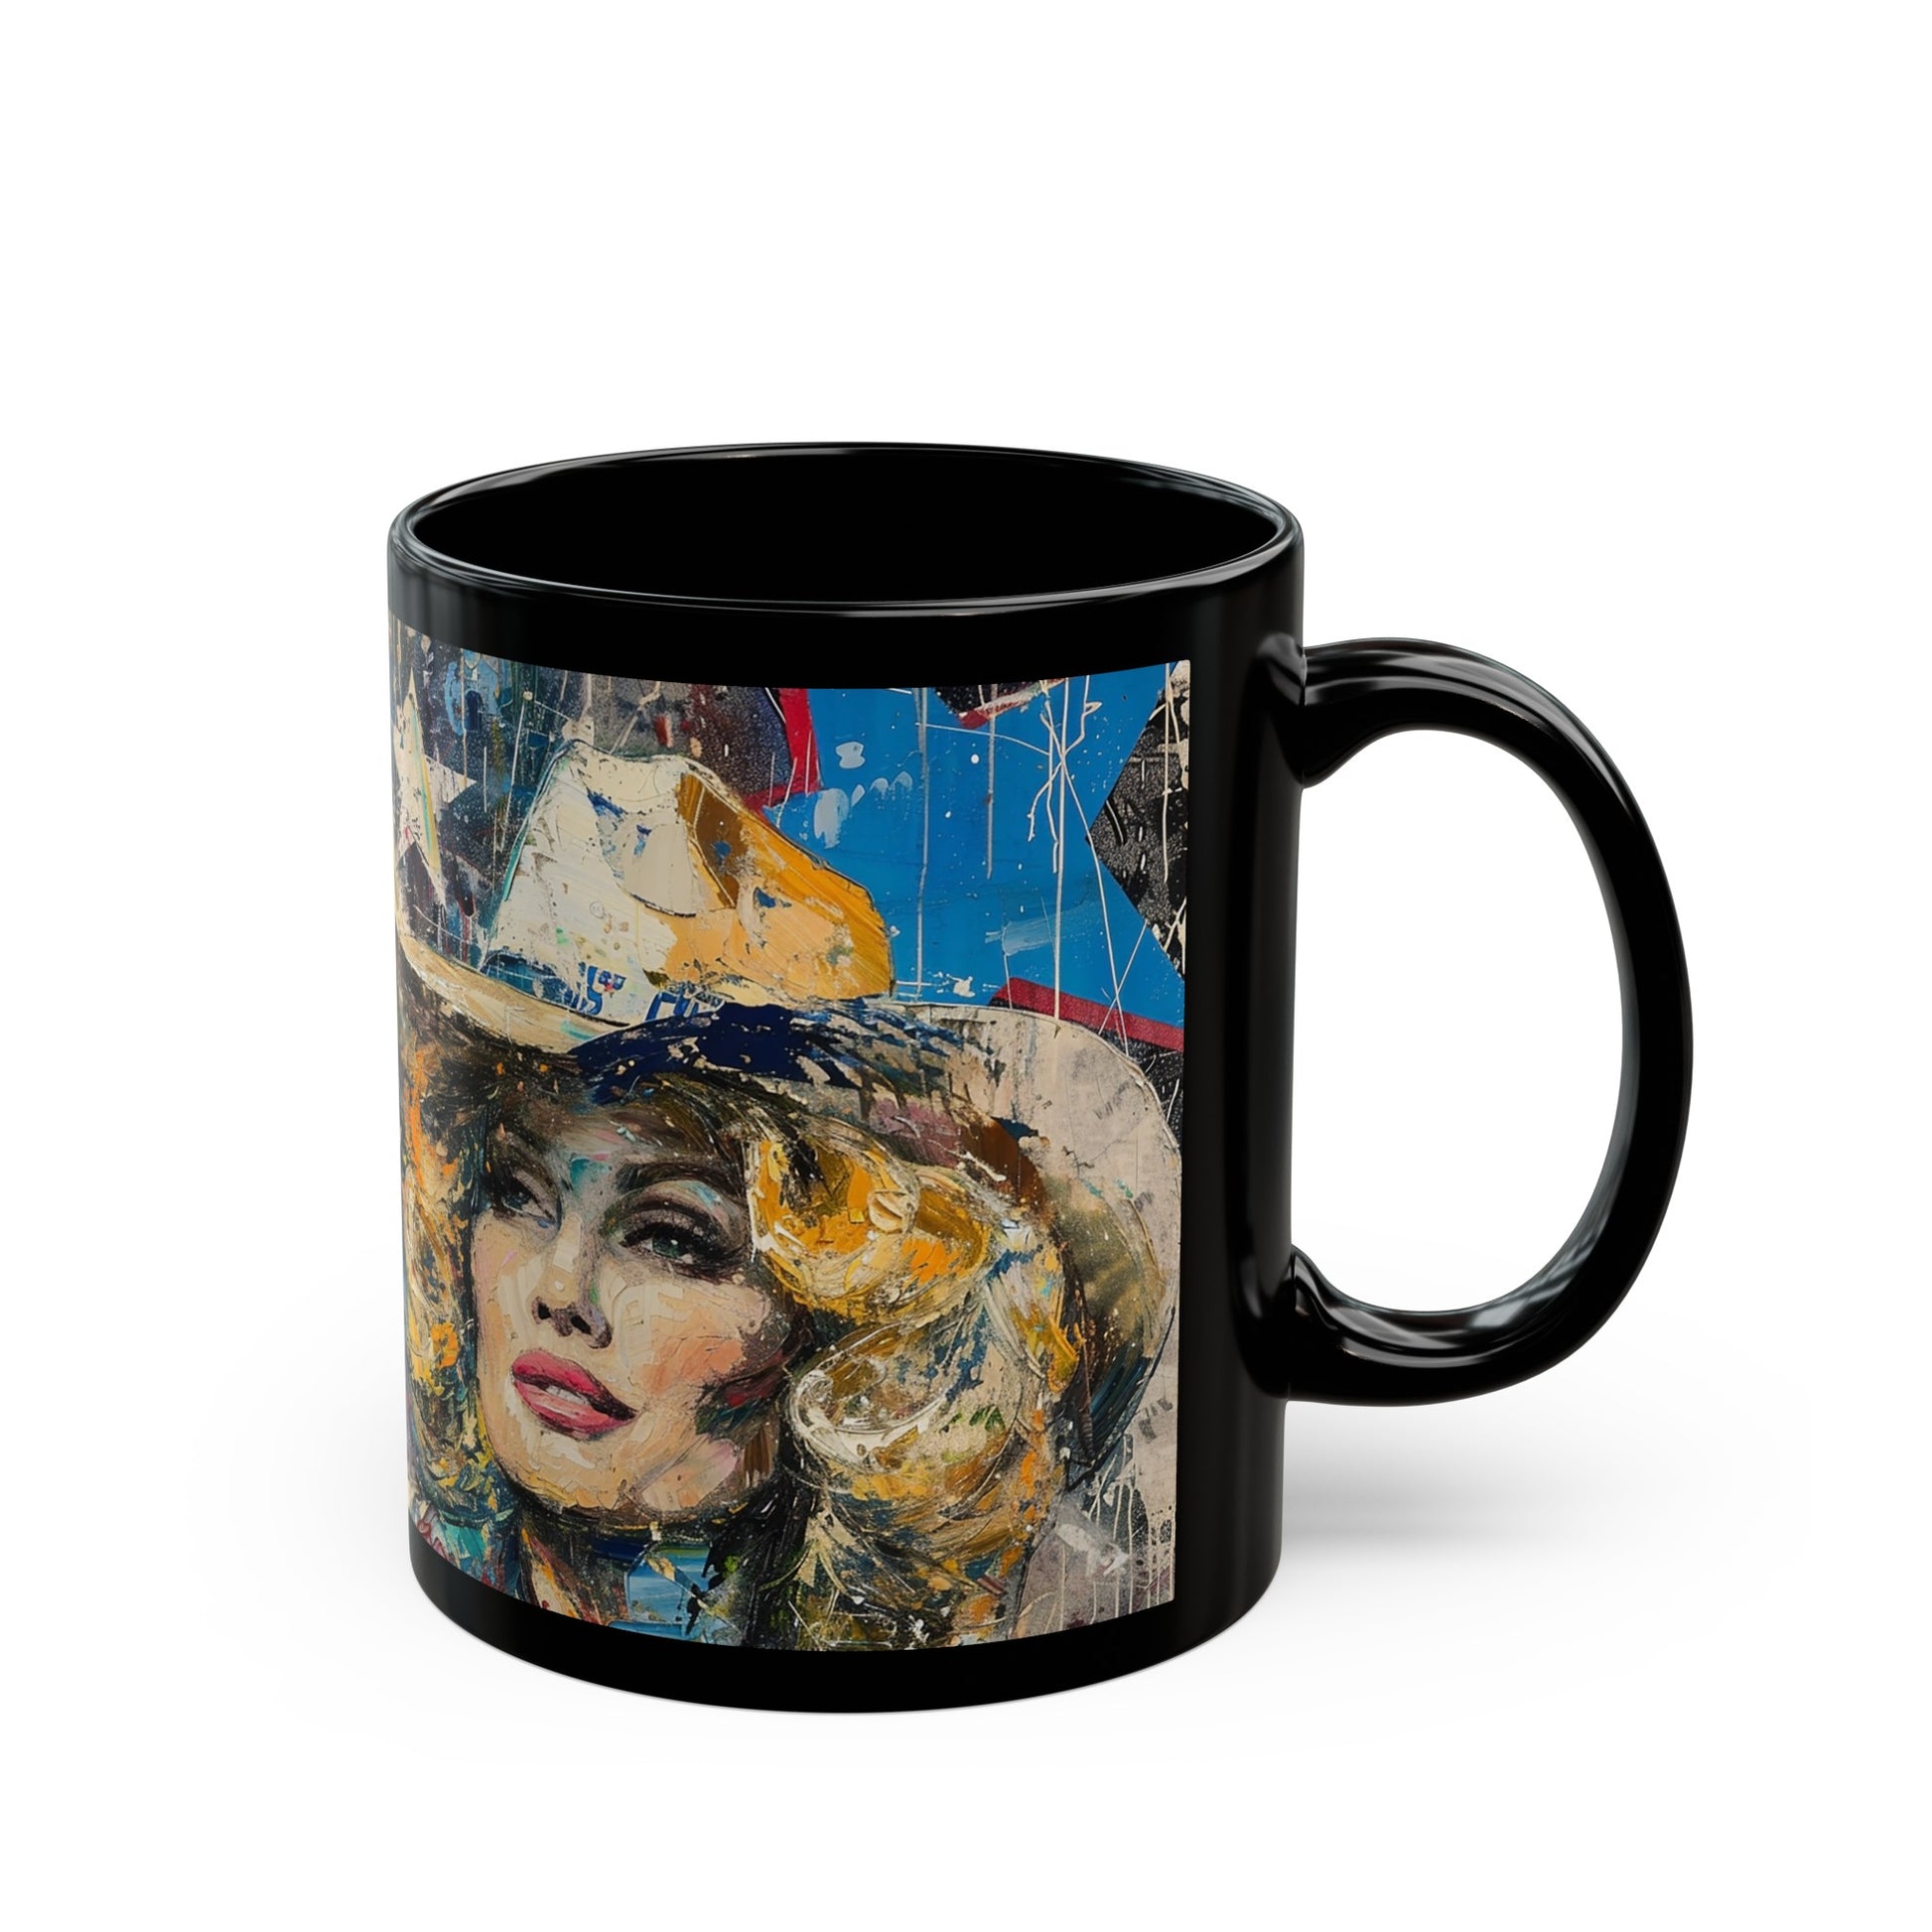 Accent Coffee Mug, 11oz - Country Queen side